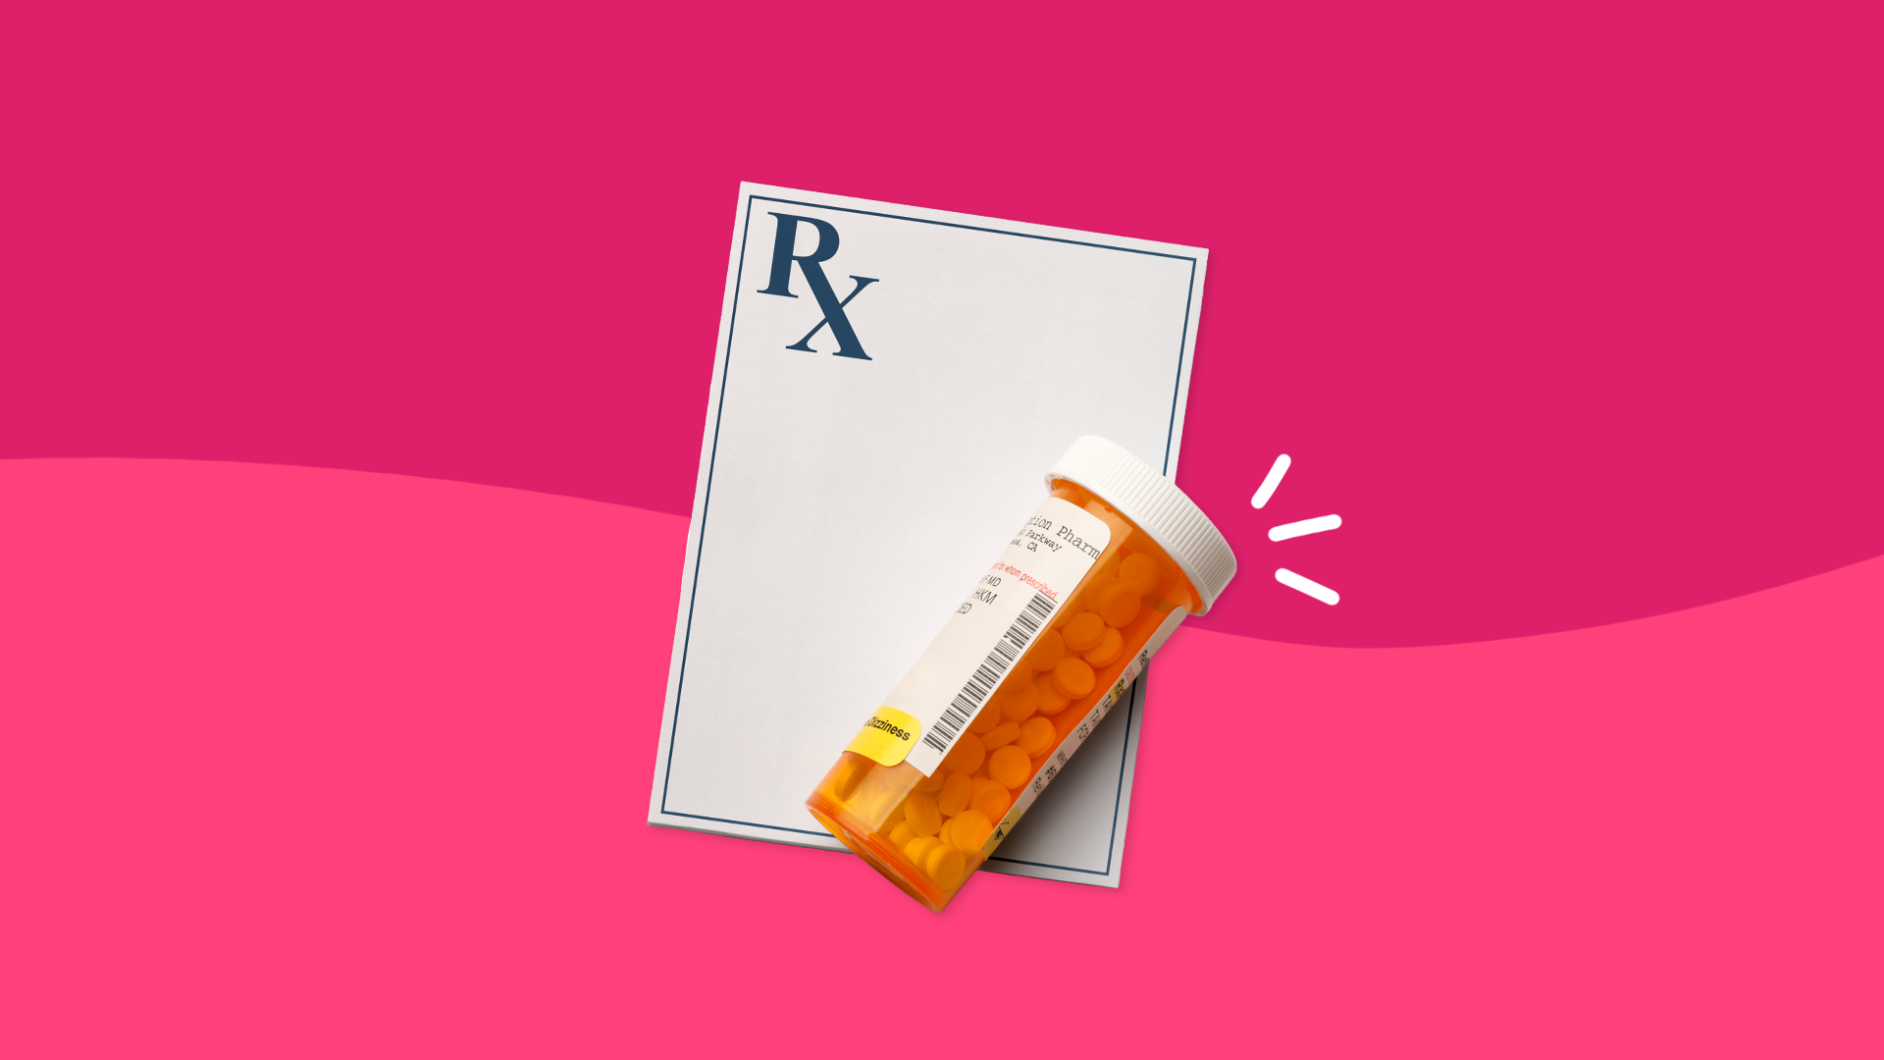 Prescription pad with pill bottle: Januvia side effects, interactions and warnings